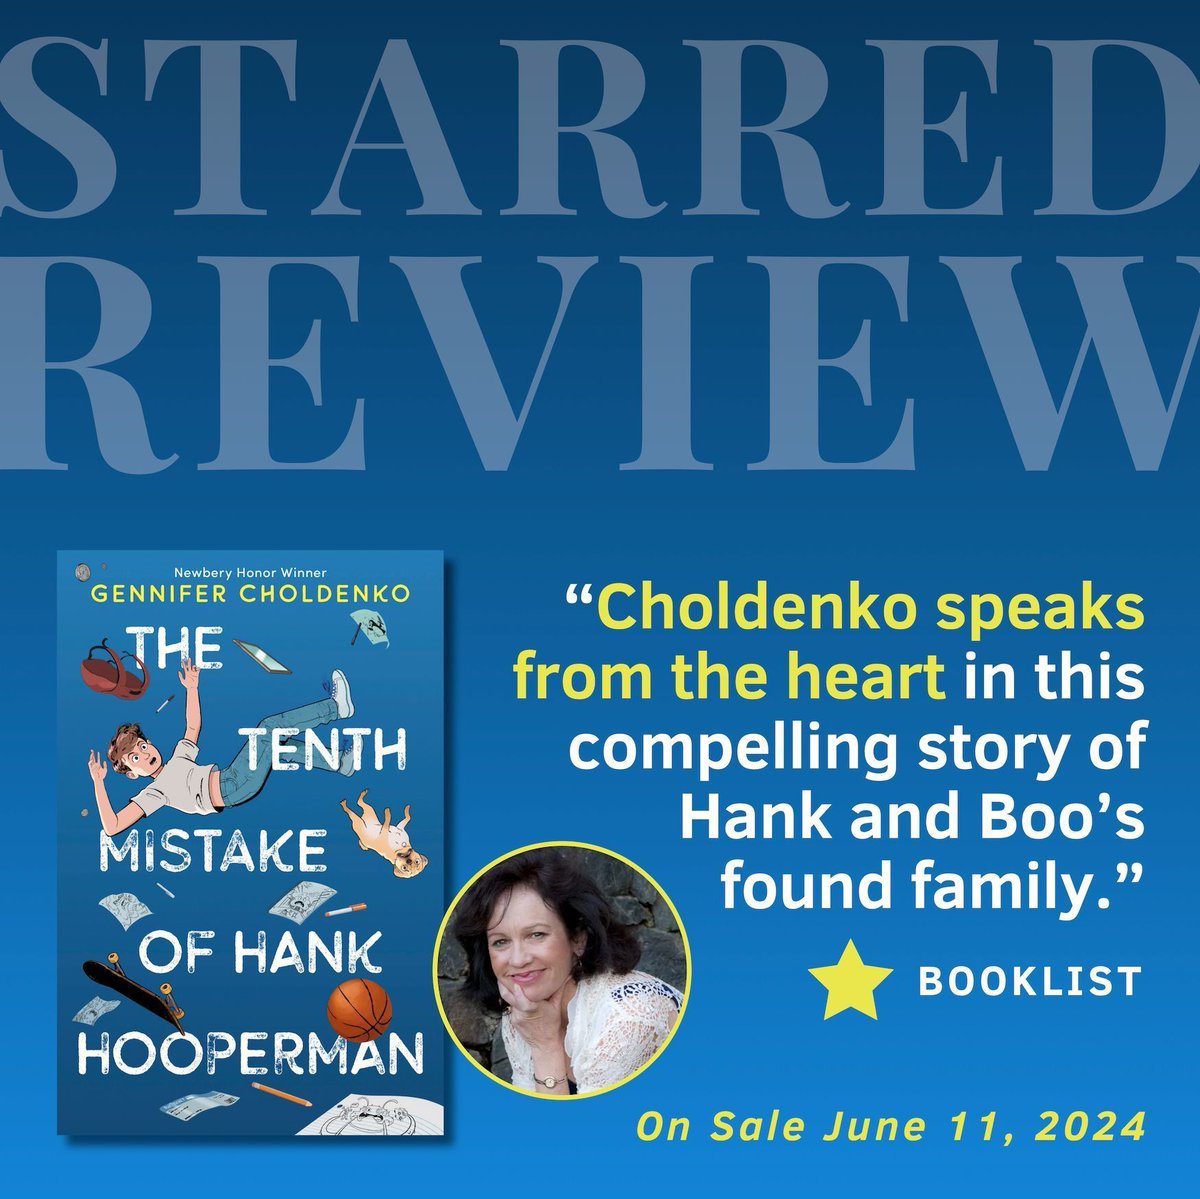 Heads up, #mglit lovers: My friend and DOGTOWN co-author Gennifer @choldenko has a new book coming out on June 11. It's called THE TENTH MISTAKE OF HANK HOOPERMAN, and I think it's her best yet. Which is really saying something. 💙 penguinrandomhouse.com/books/551520/t… @KnopfBFYR